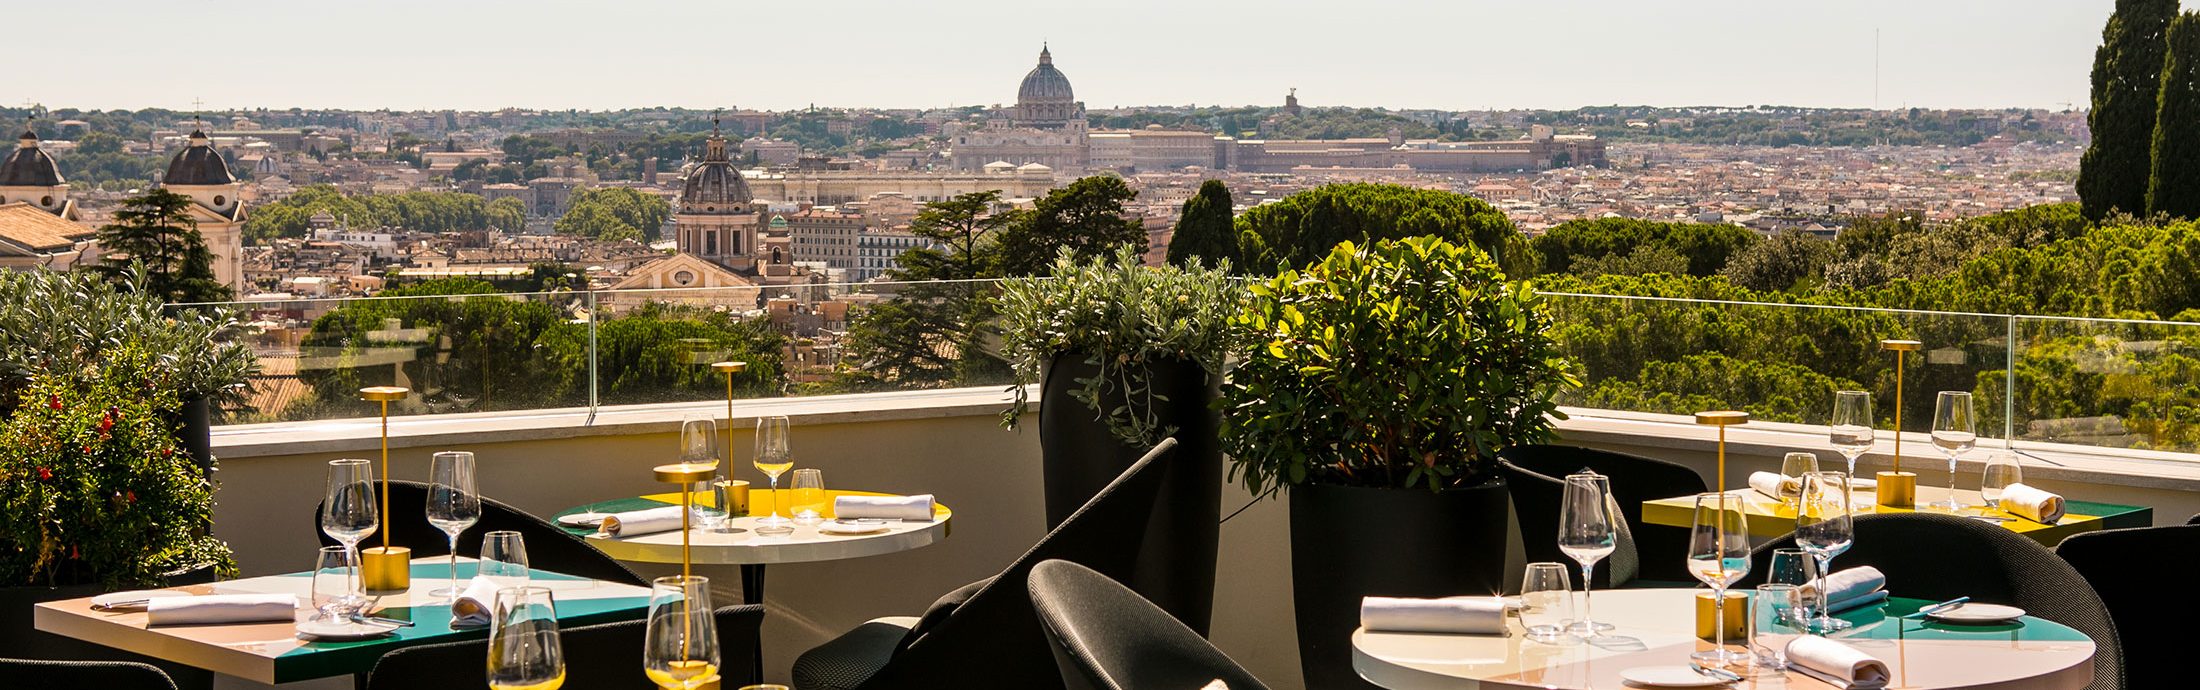 rooftop-bar-and-restaurant-in-rome